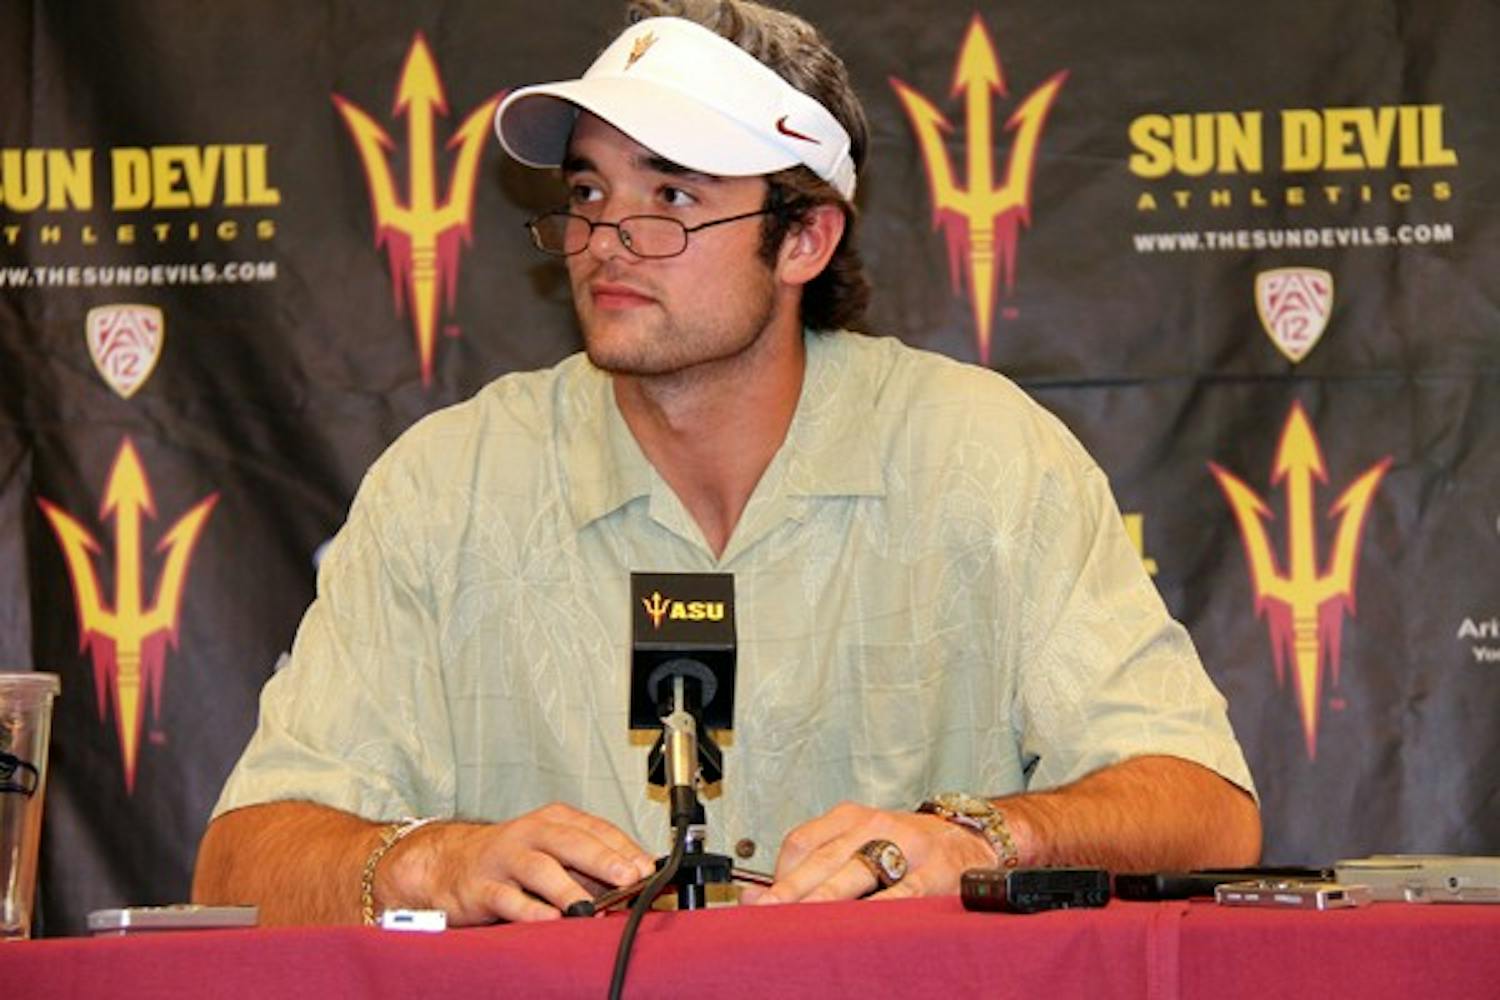 ALL DRESSED UP: ASU junior quarterback Brock Osweiler answers questions at Monday’s press conference dressed up as coach Dennis Erickson, all the way down to the white hair, visor and championship ring. (Photo courtesy of Maggie Emmons)